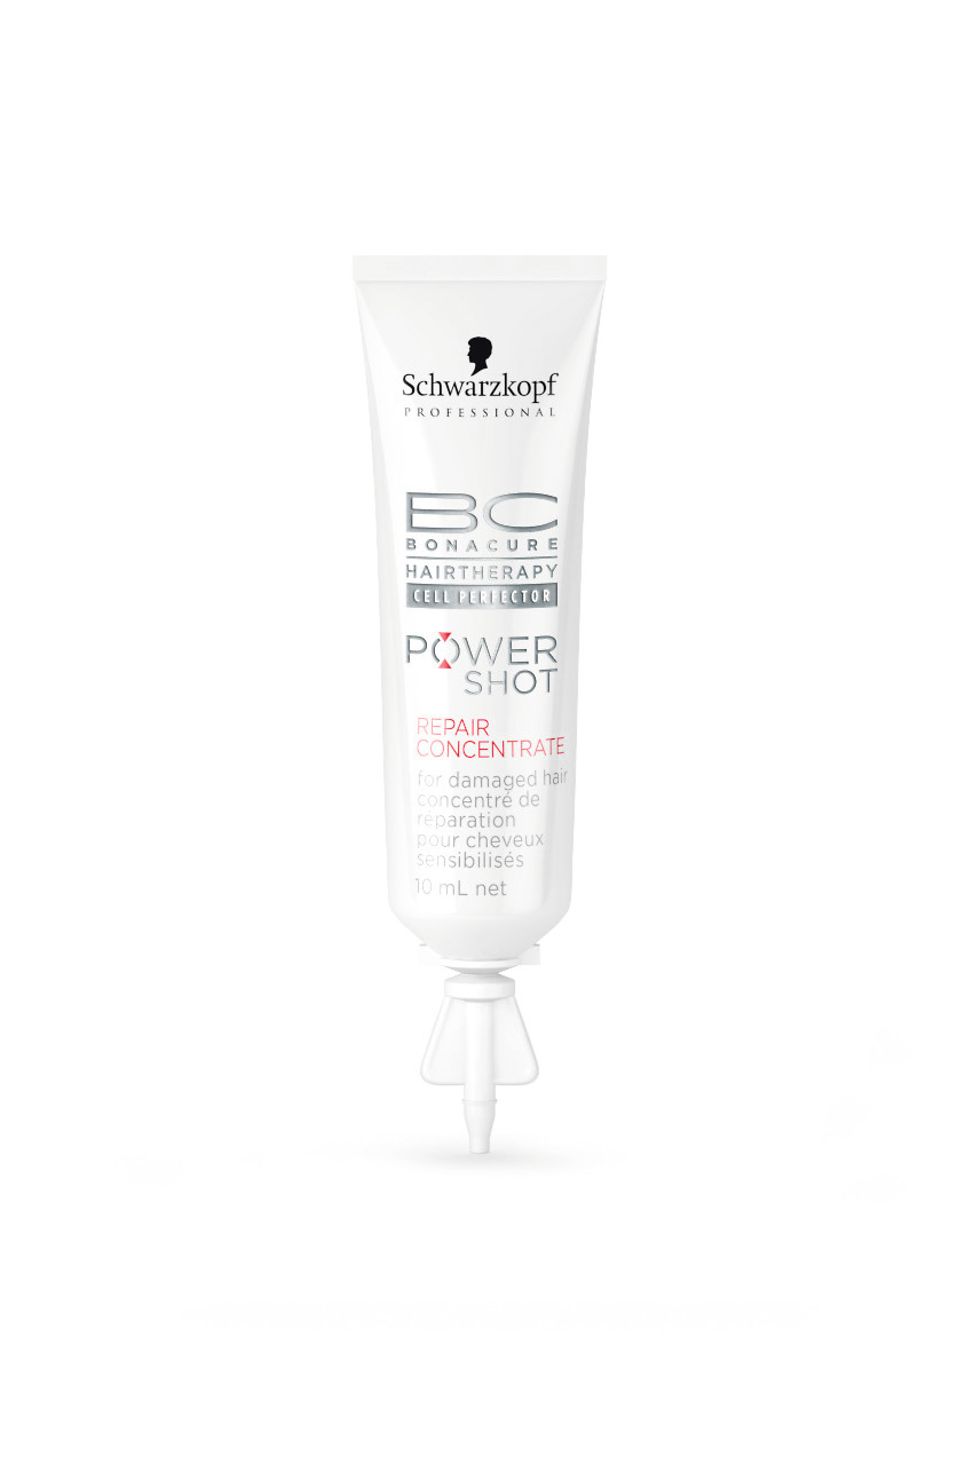 BC Hairtherapy Cell Perfector Repair Rescue